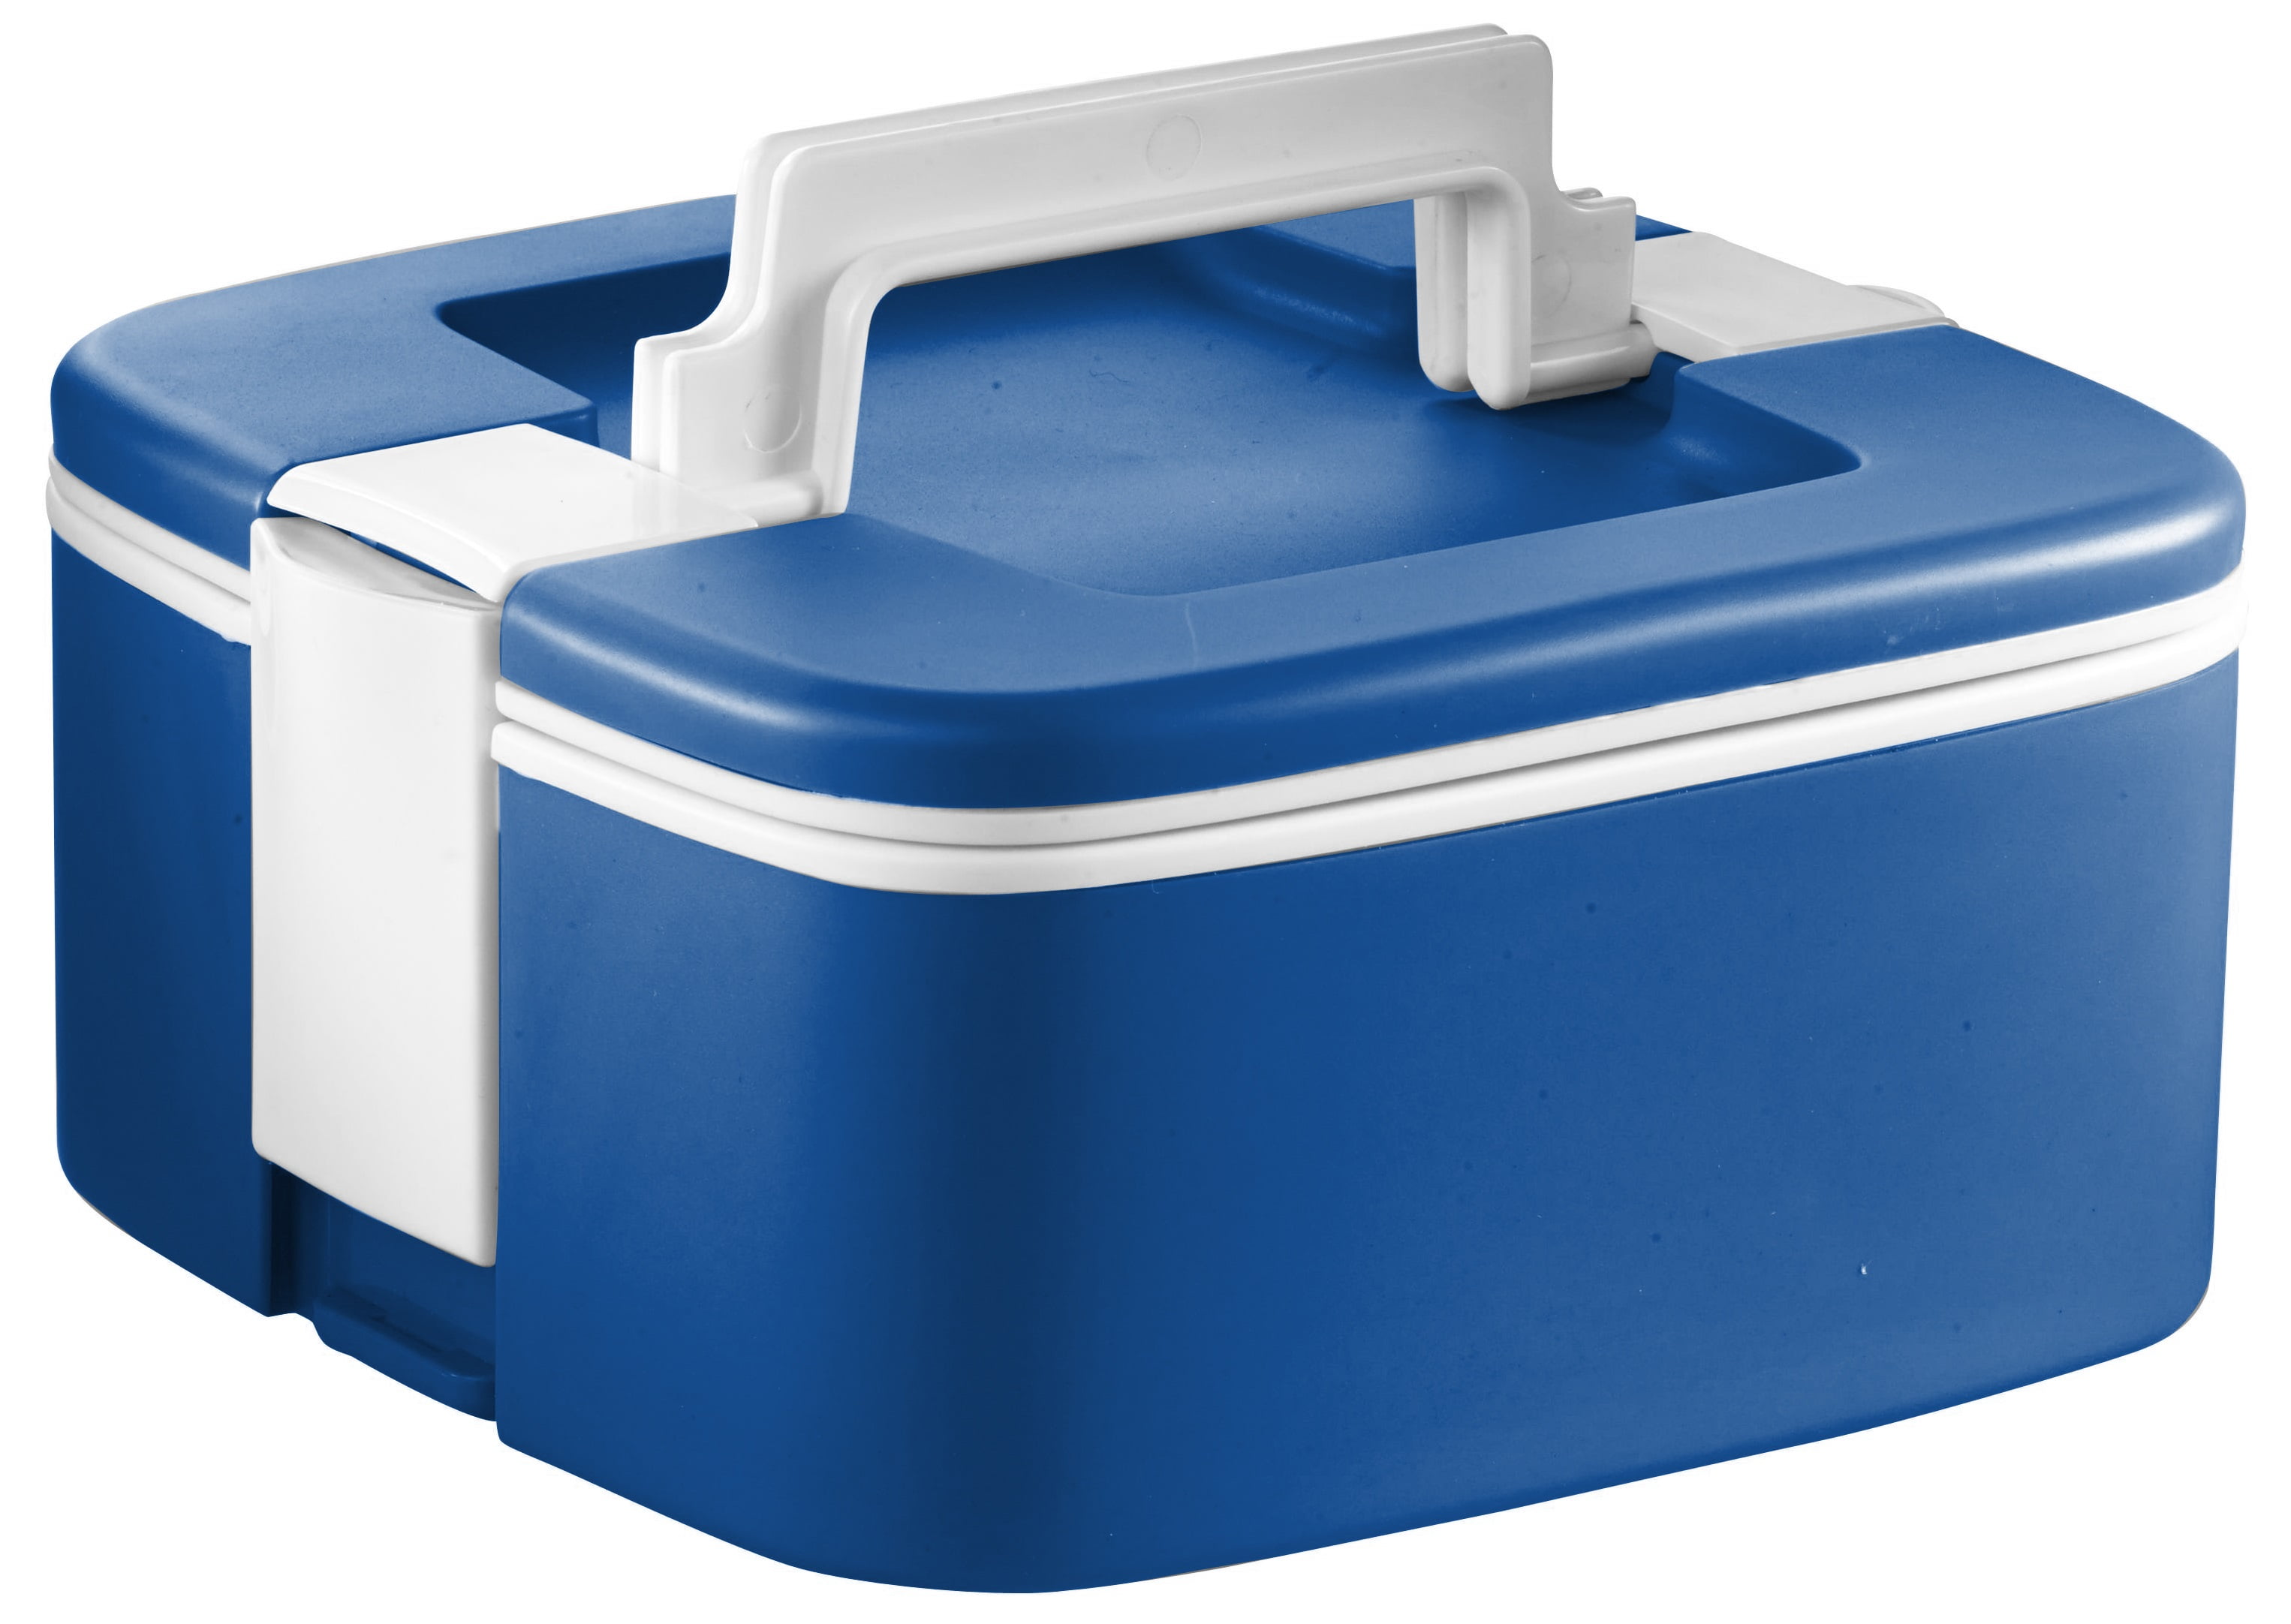 YUNx Portable Two-Compartment Lunch Box with Tableware - 850ml Capacity for  Office or School